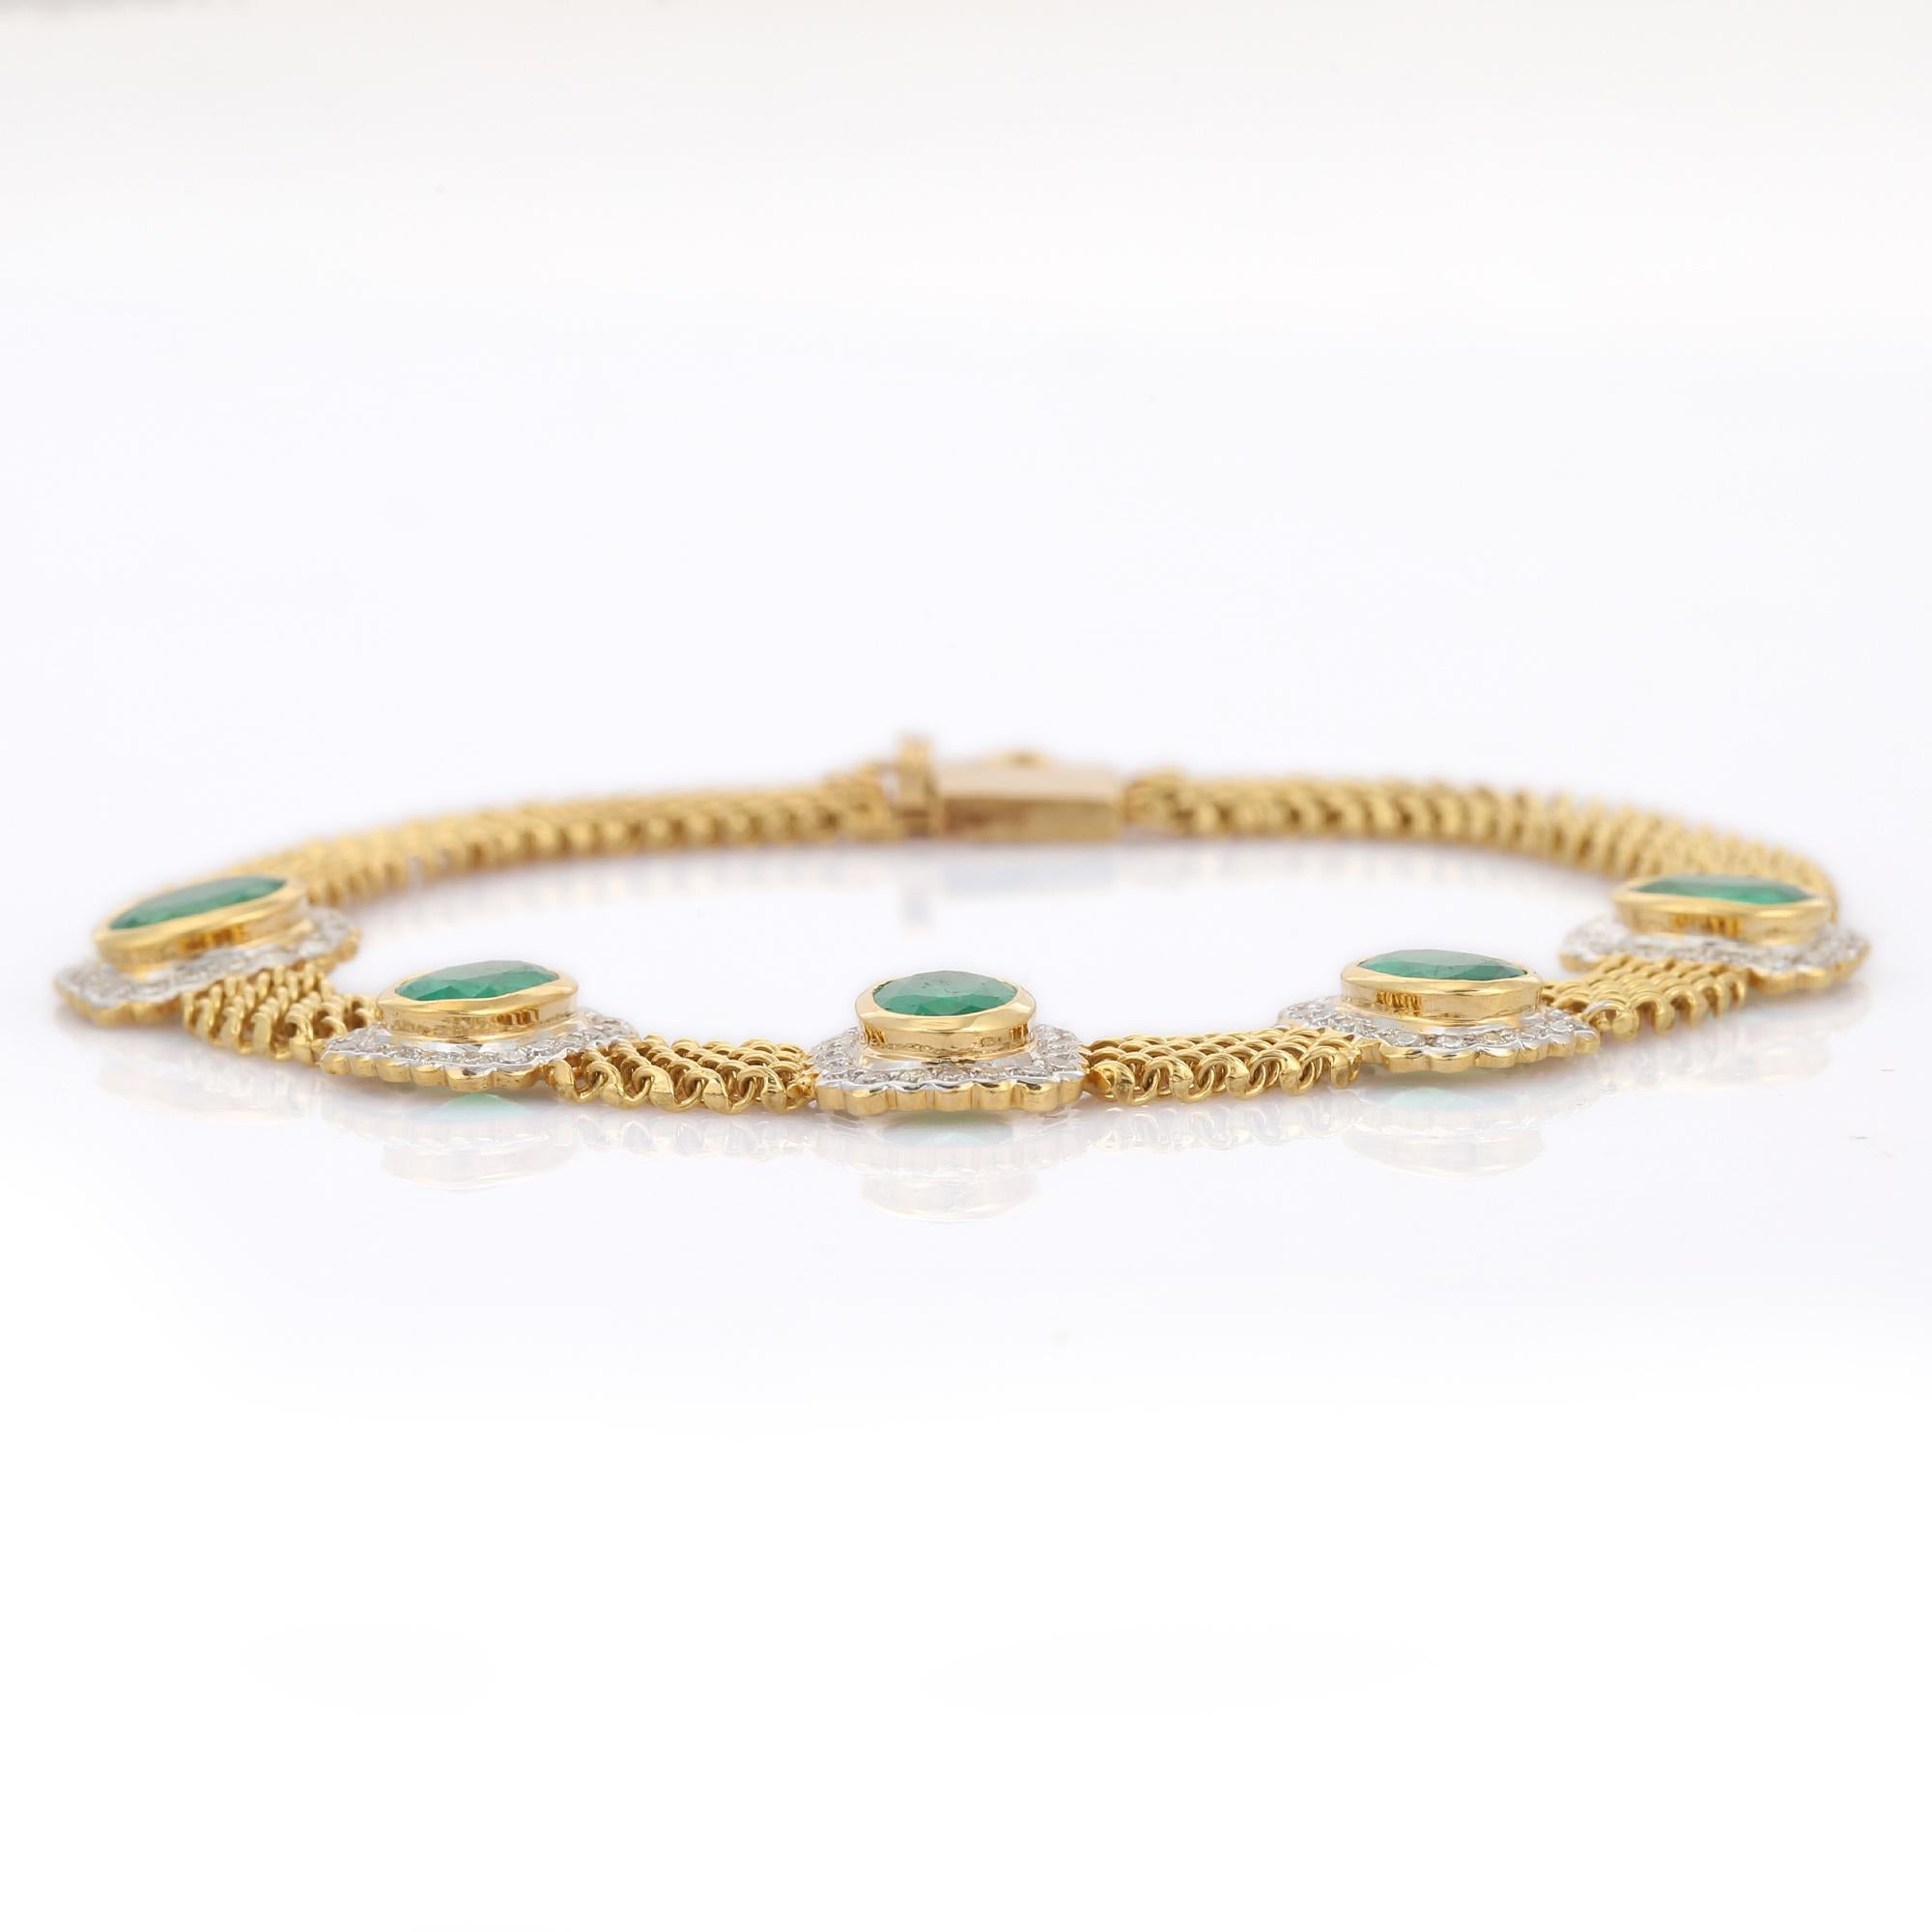 Emerald bracelet in 18K Gold. It has a perfect oval cut gemstone studded with diamonds to make you stand out on any occasion or an event. 
A cuff bracelet is an essential piece of jewelry when it comes to your wedding day. The elegant style